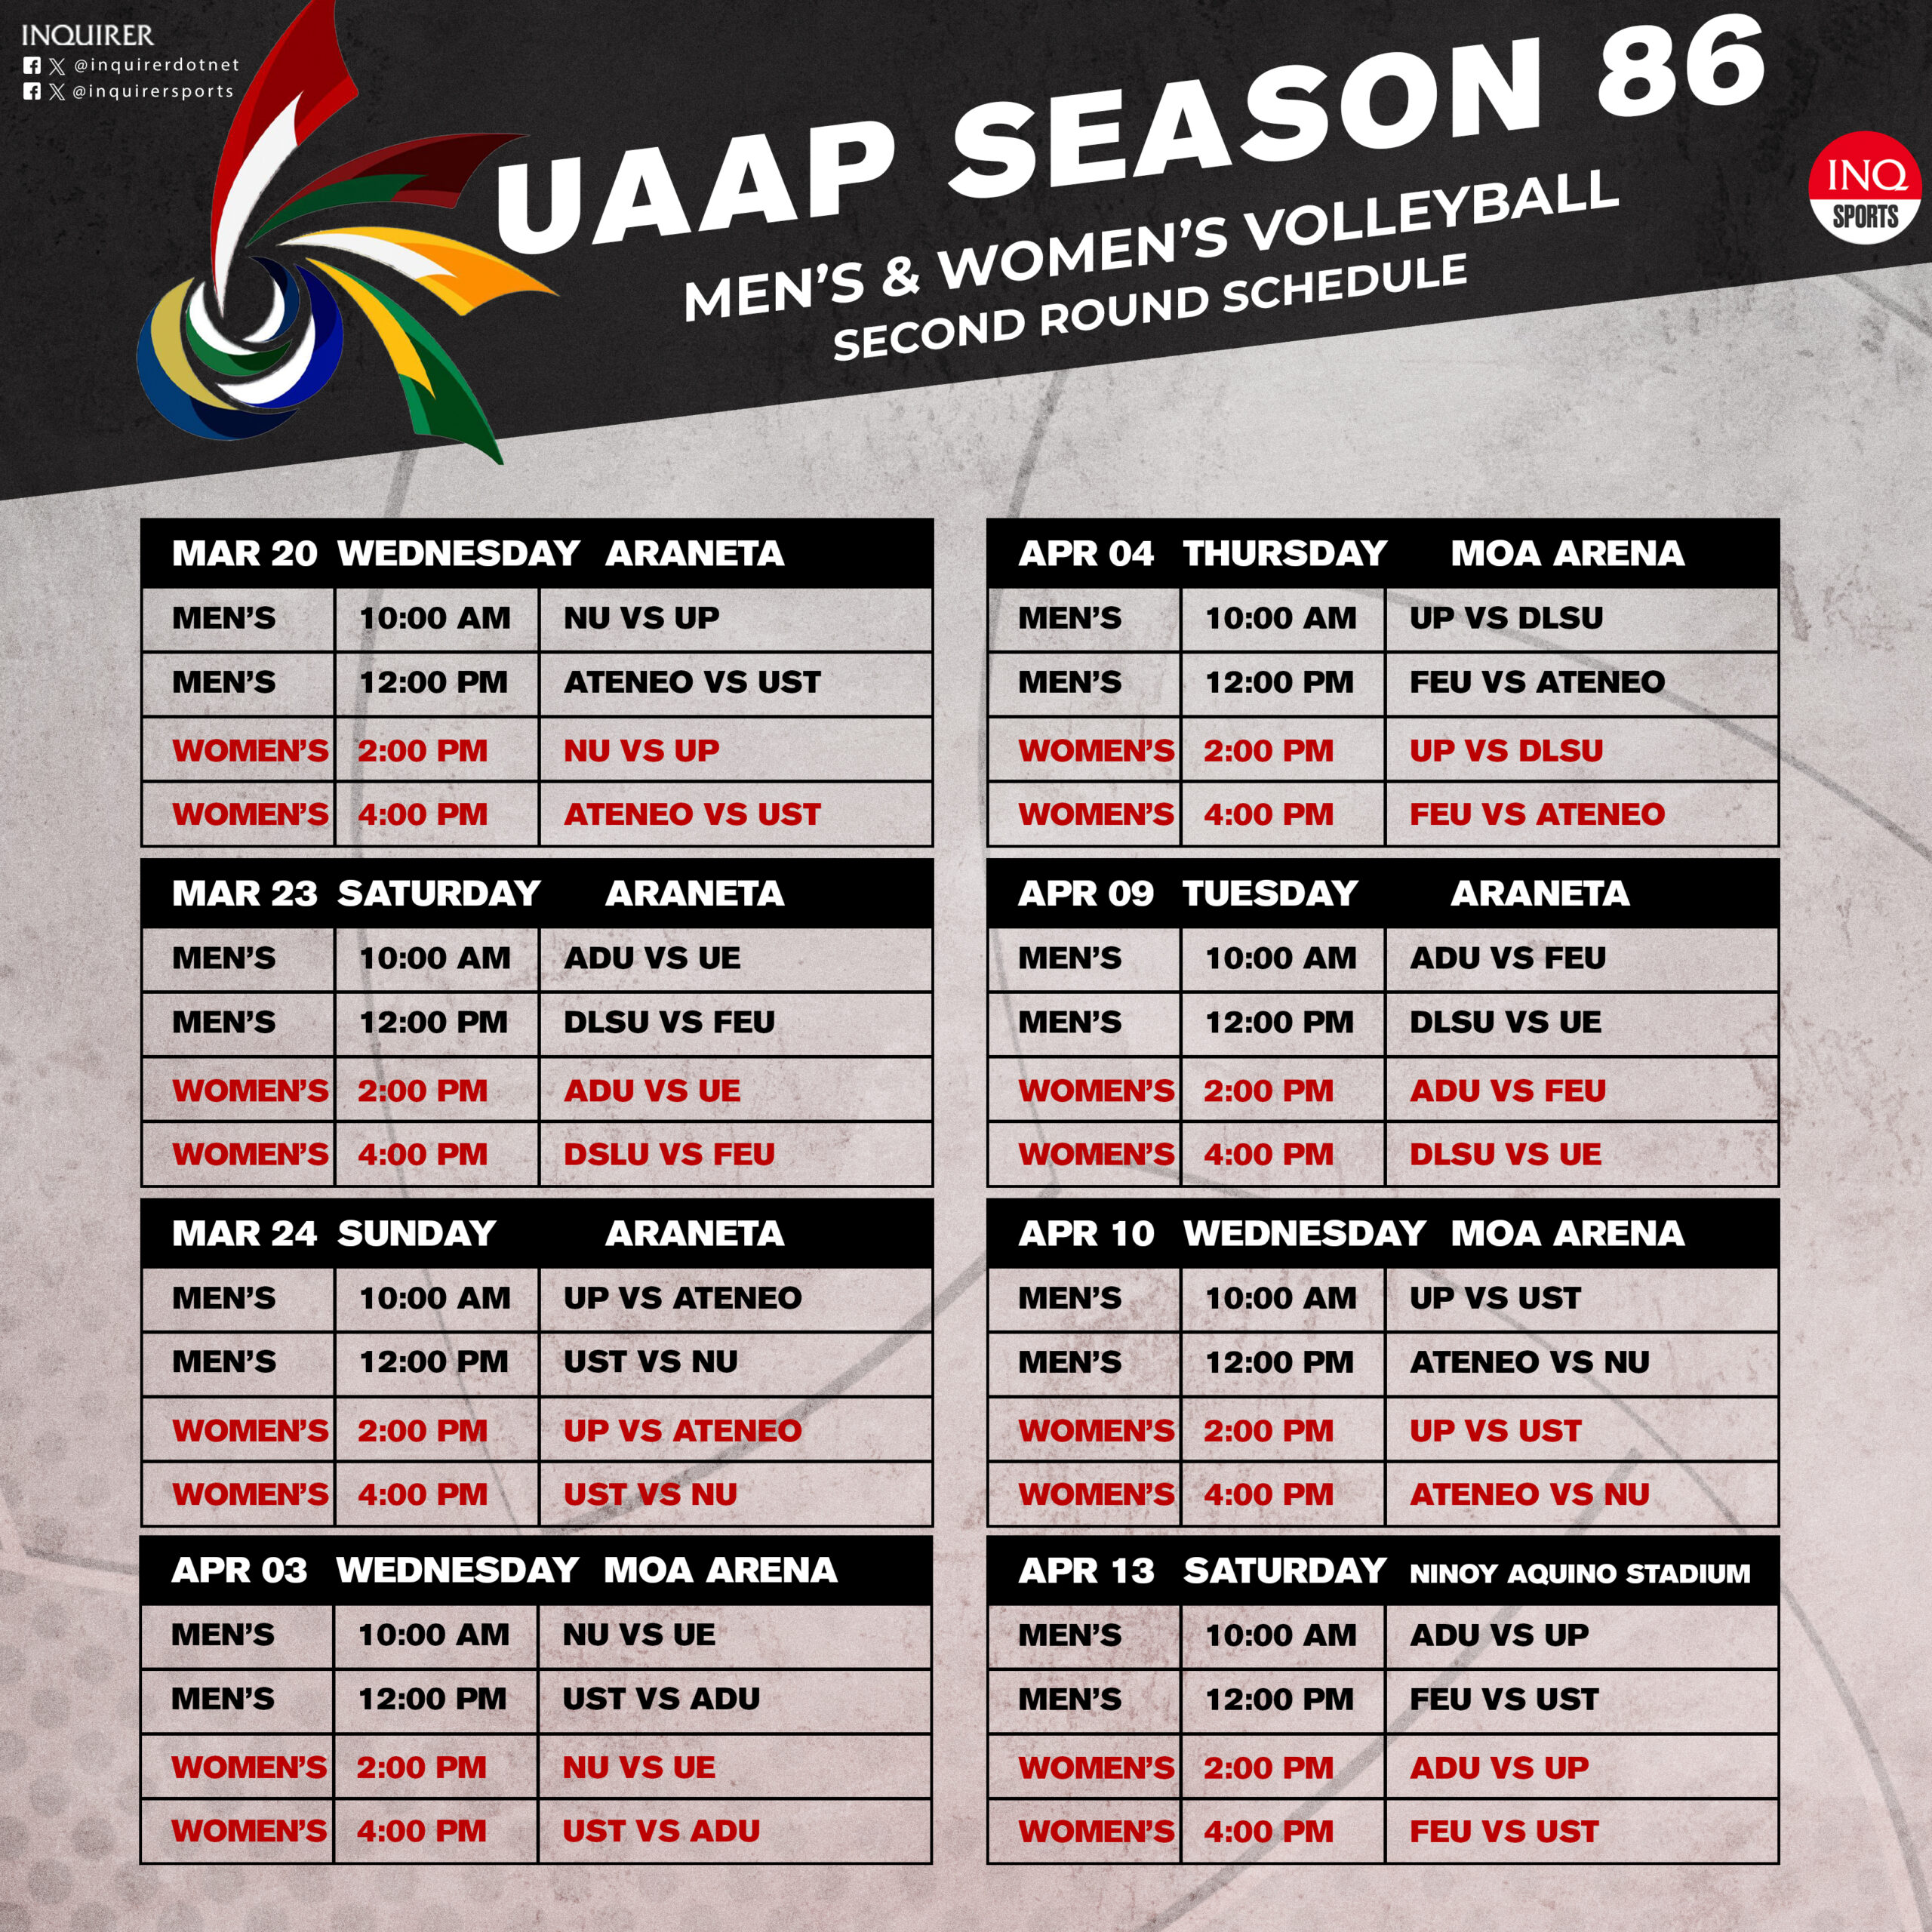 UAAP Season 86 men's and women's volleyball second-round schedule (full)